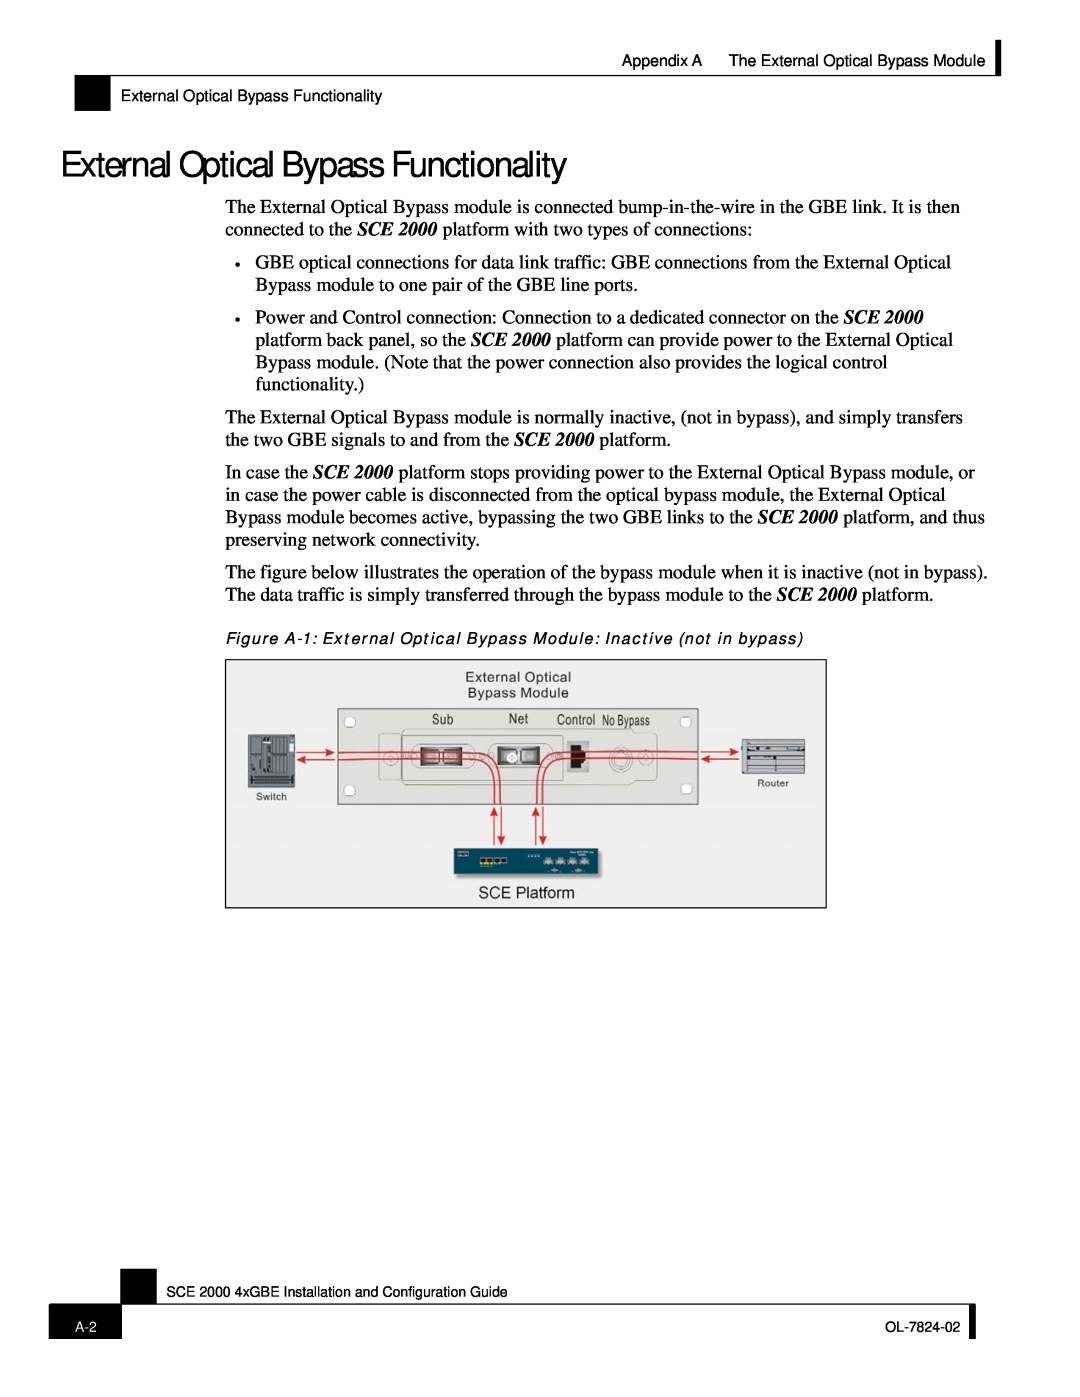 Cisco Systems SCE 2000 4xGBE manual External Optical Bypass Functionality 